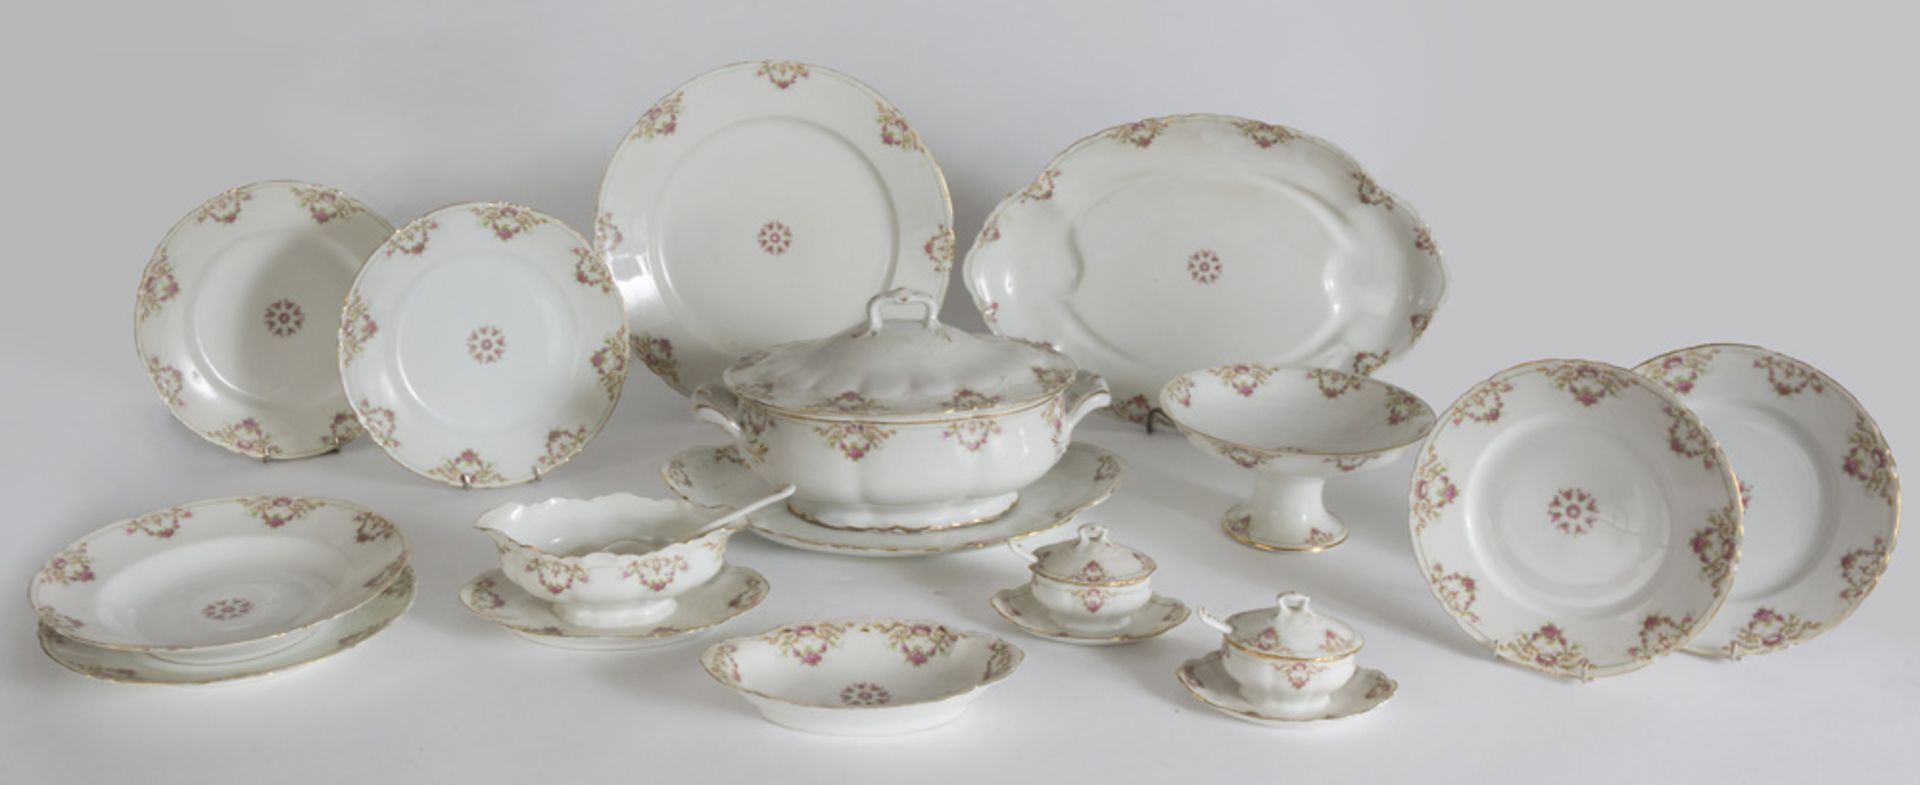 SET OF PORCELAIN DISHES, GINORI INIZIO in polychromy, decorated with flower garlands. Consist of